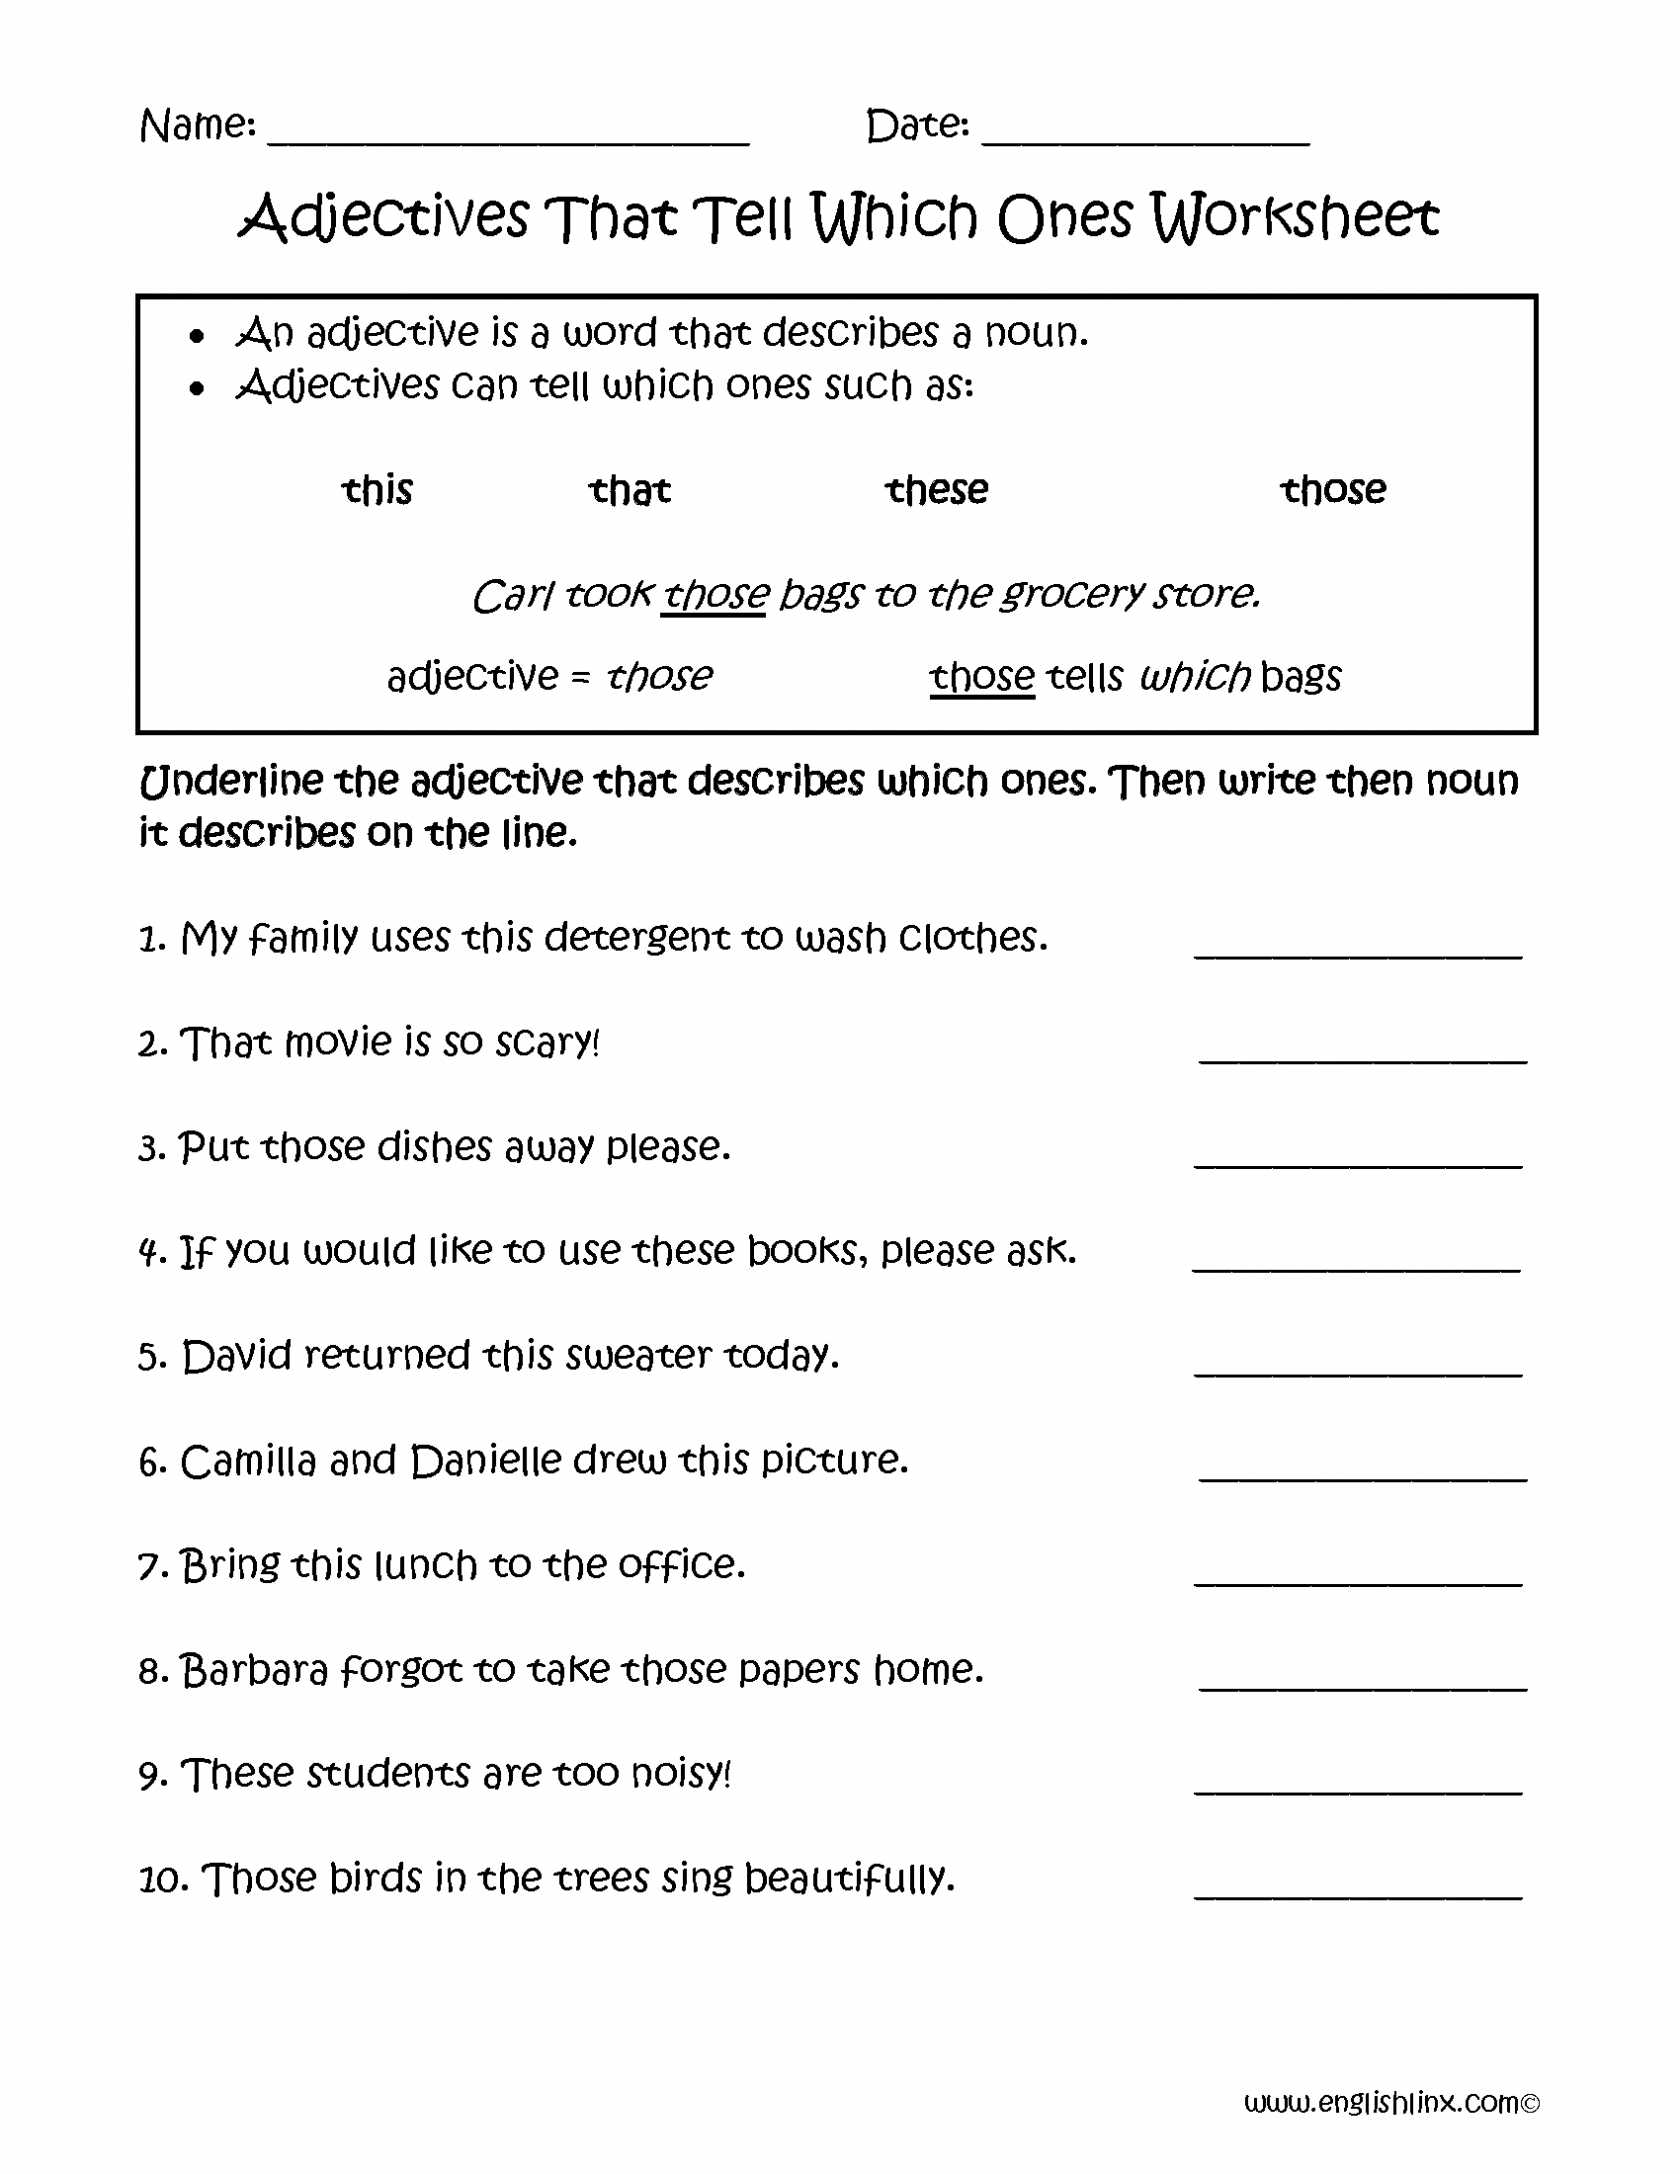 Possessive Adjectives Worksheet as Well as Matheets Parative Adjectives for Kindergarten Possessive Pronouns